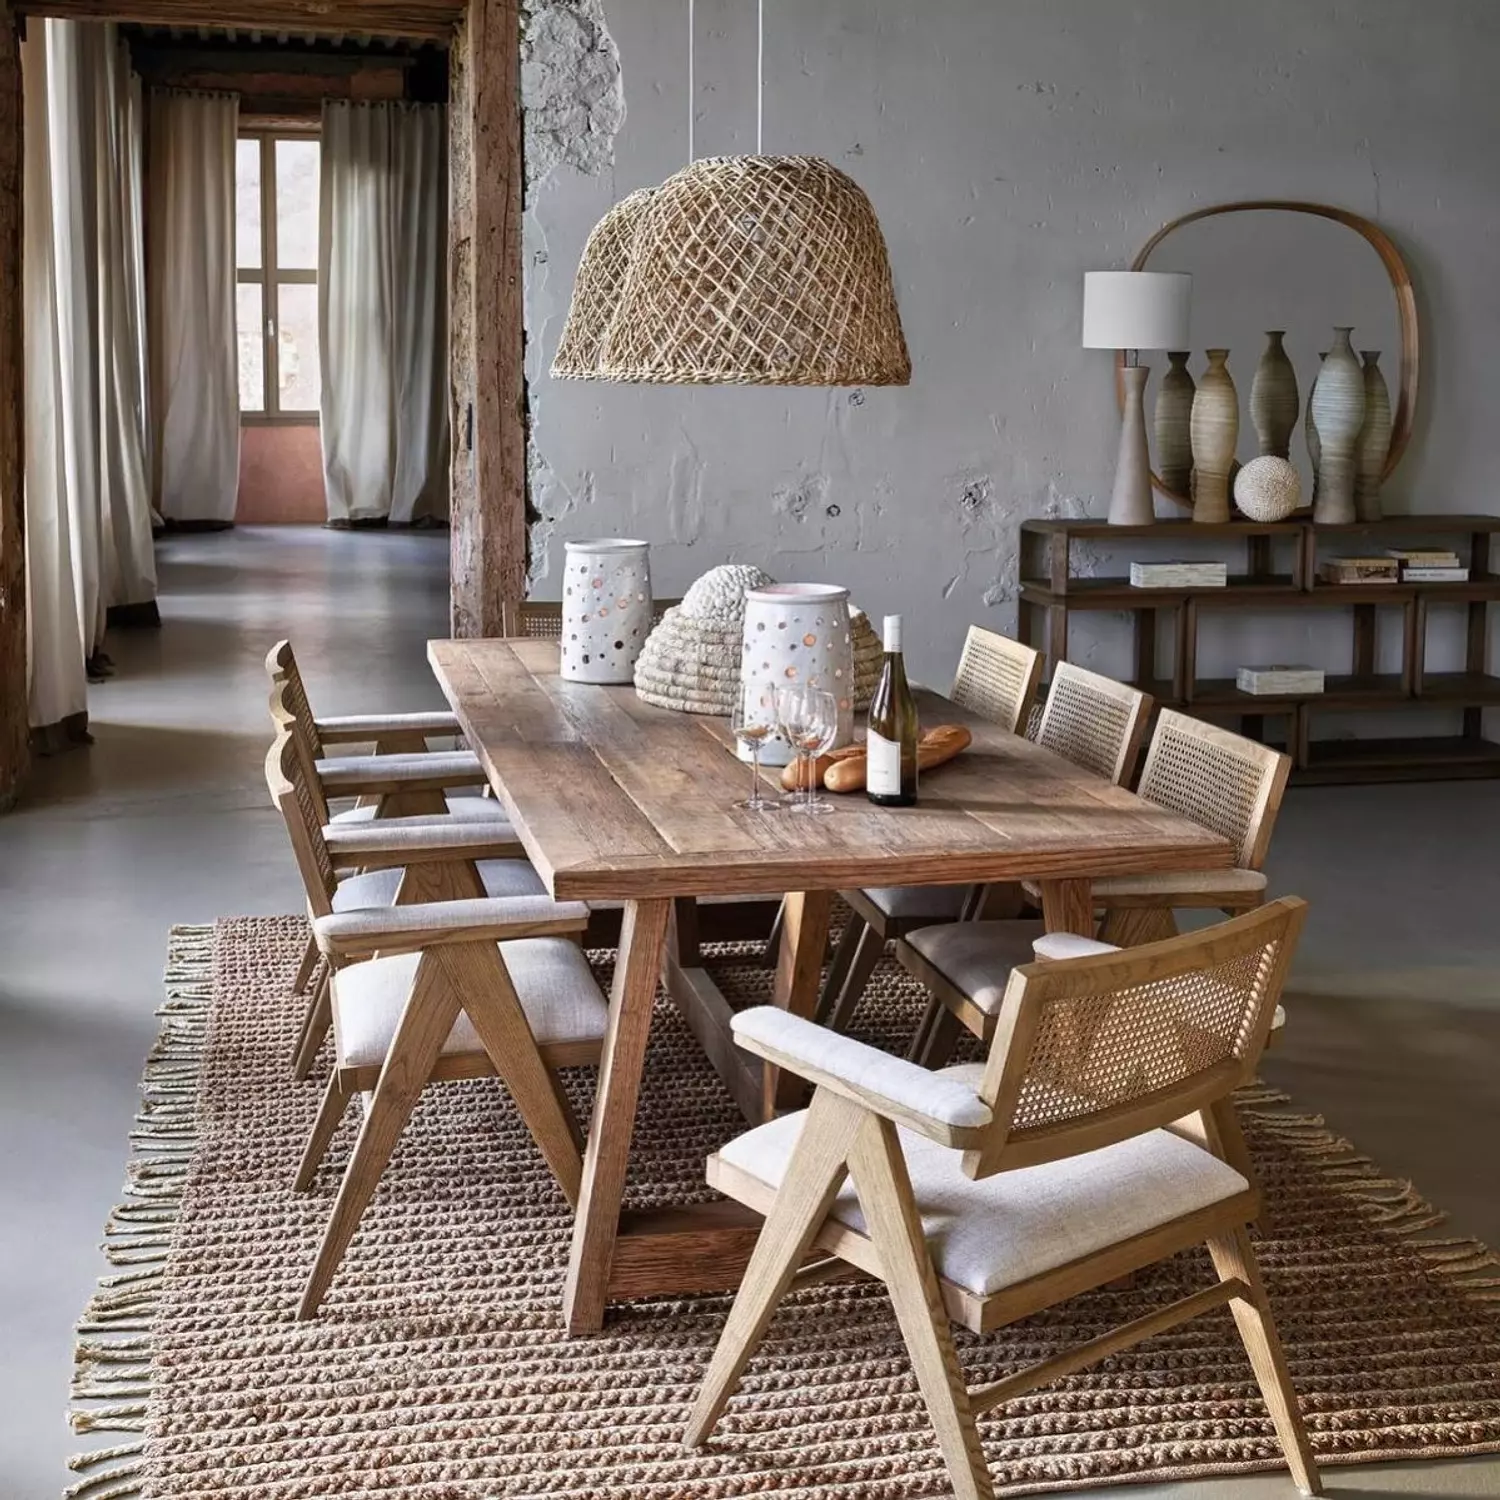 Willy dining table & chairs hover image